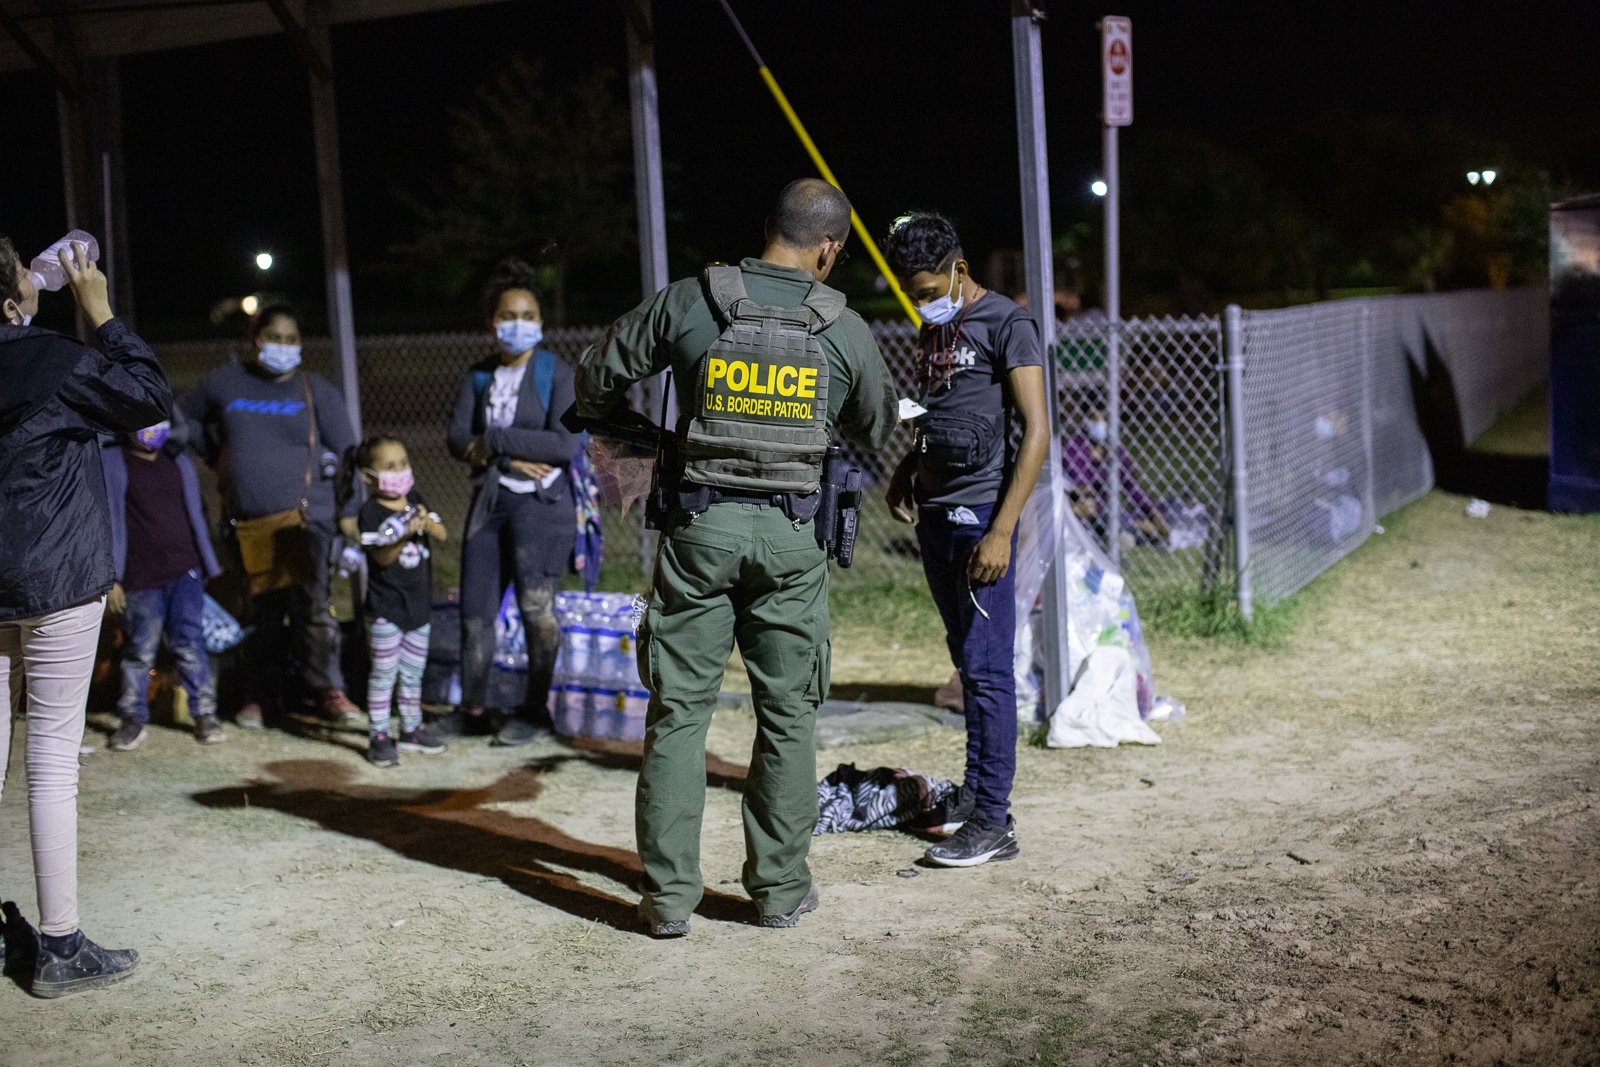 Some migrants traveling in a group consisting of only men attempted to avoid law enforcement officials after illegally entering the U.S. by running into bushes told Border Patrol agents they were 17 years old after they were apprehended near La Joya, Texas on August 7, 2021. (Kaylee Greenlee – Daily Caller News Foundation)